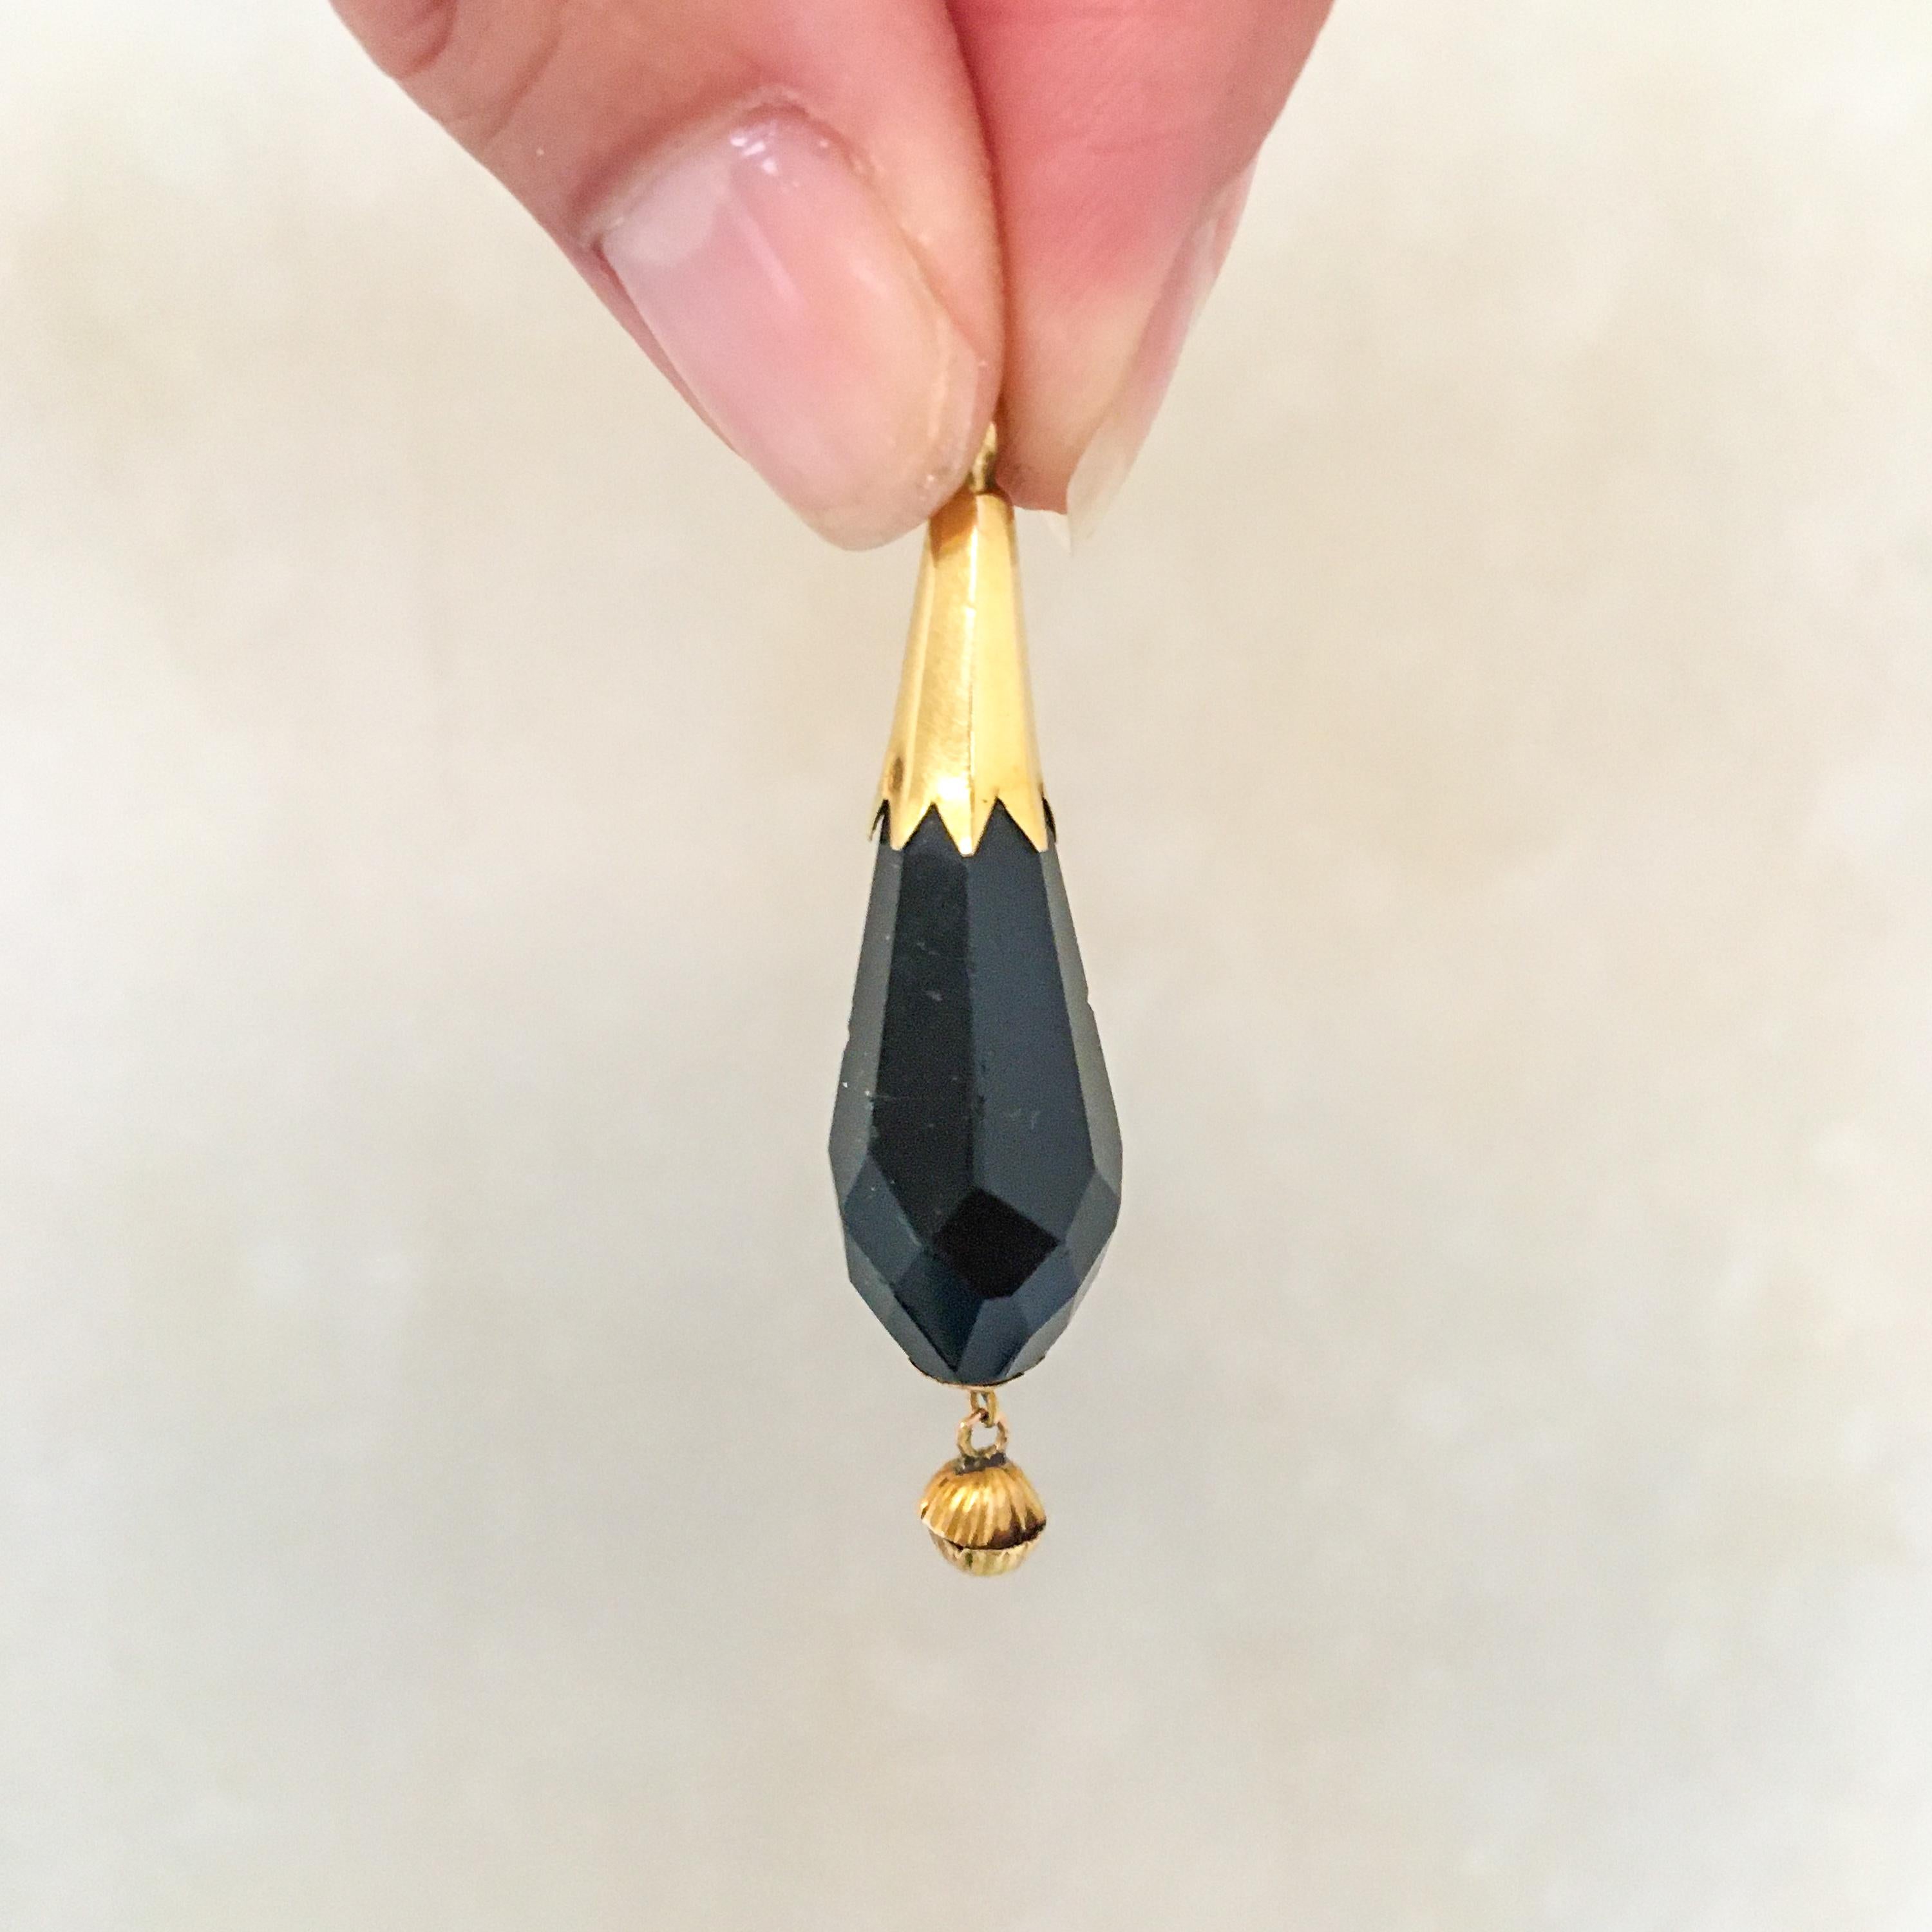 These antique 1850's faceted black jet pendants are created in 14 karat yellow gold. The black stone, also known as black yet, is beautifully faceted into this briolette shaped pendants. The gold on top has nicely jagged edges, while the bottom is